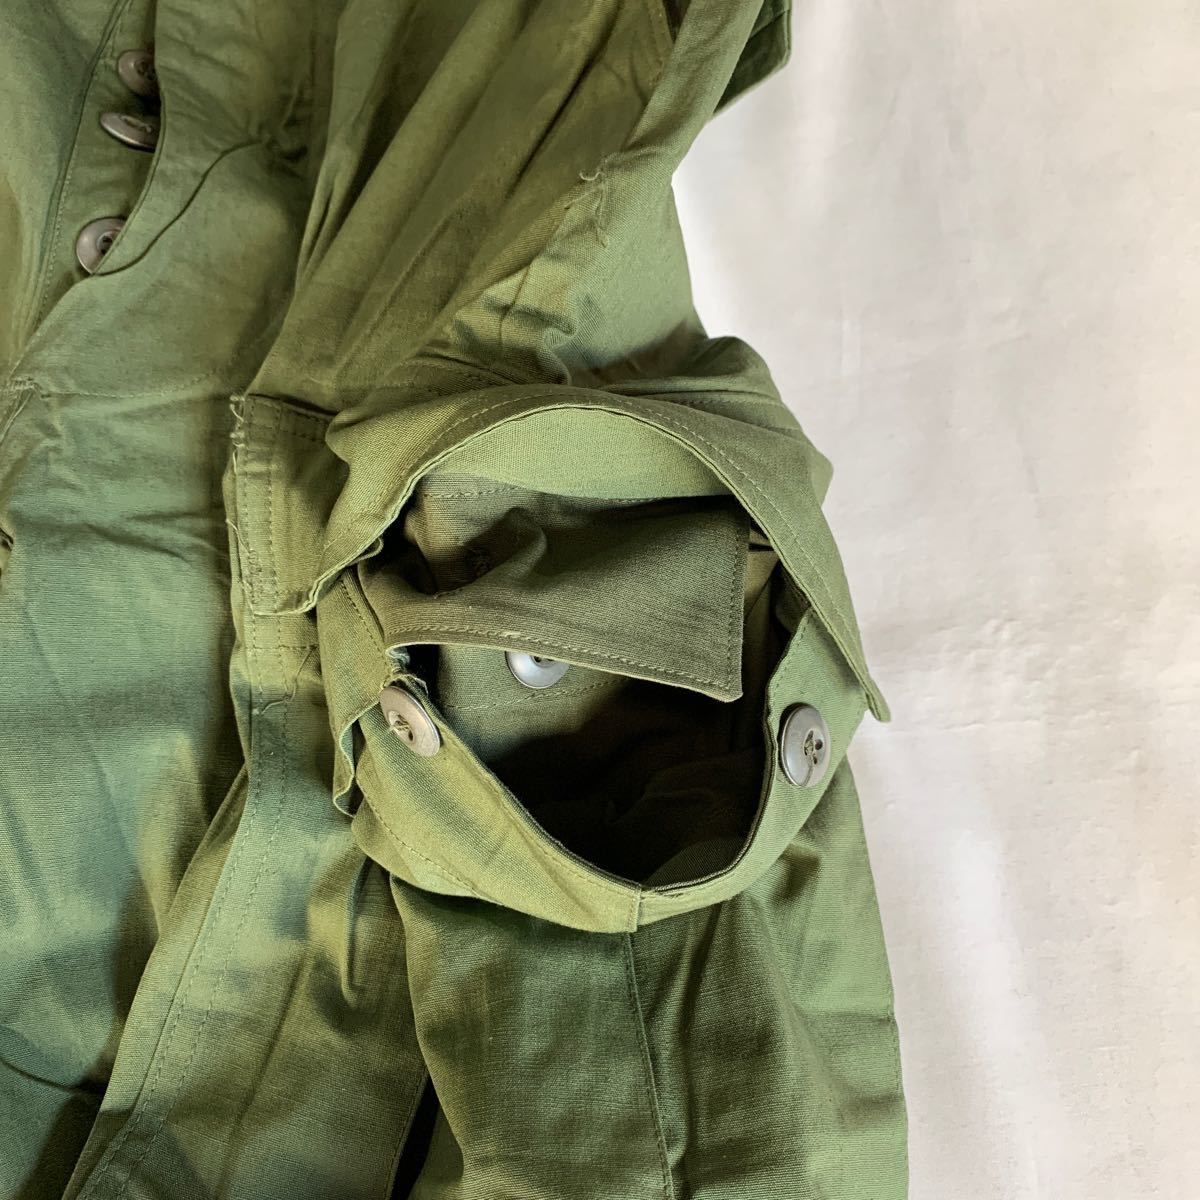 60s U.S.ARMY JUNGLE FATIGUE TROUSERS 3rd DEAD STOCK USARMY ジャングルファティーグ カーゴパンツ ノンリップ デッドストック 送料無料 の画像6